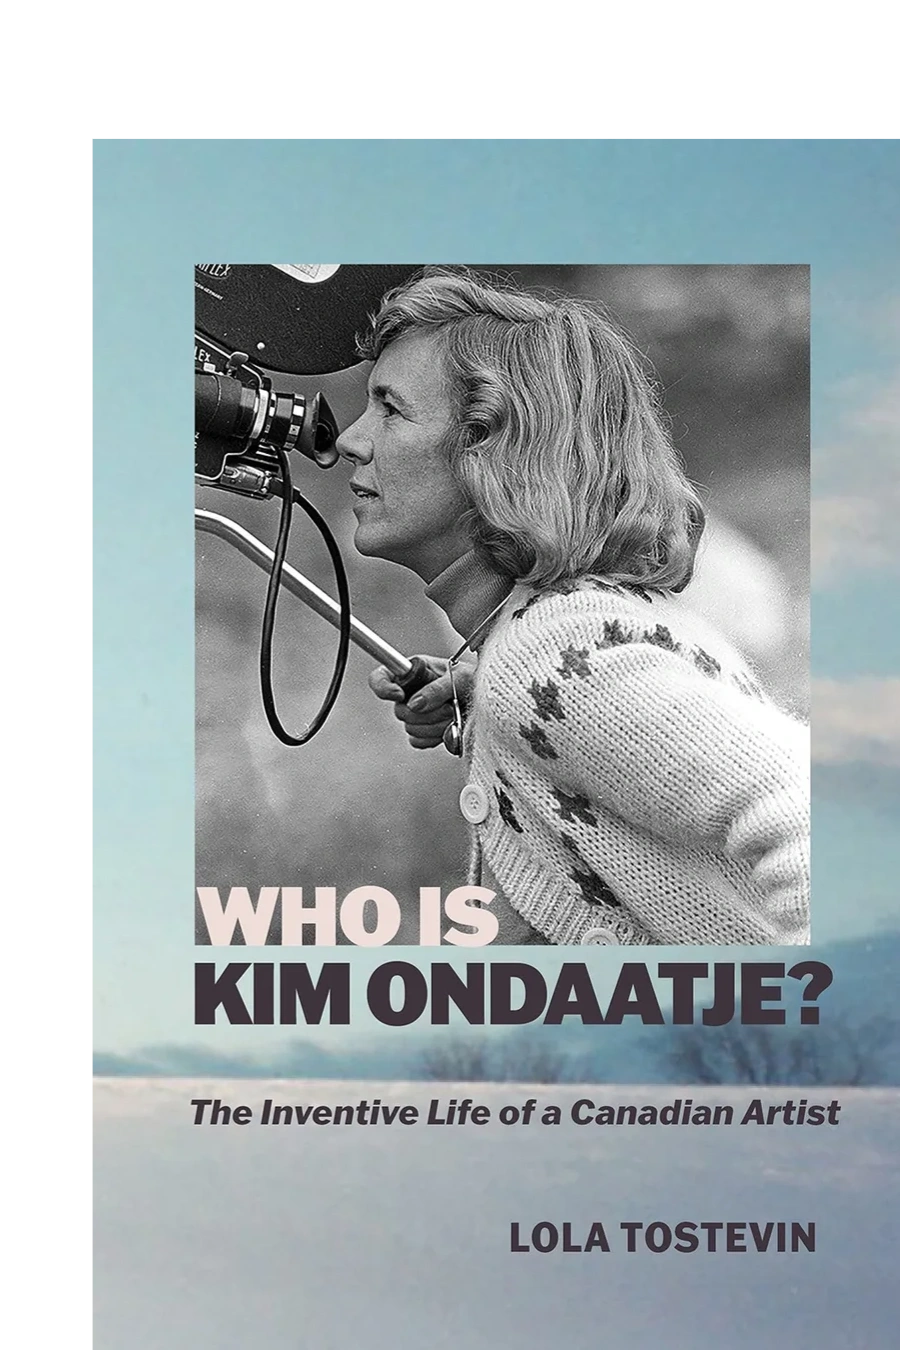 Cover of Who Is Kim Ondaatje? The Inventive Life of a Canadian Artist by Lola Tostevin